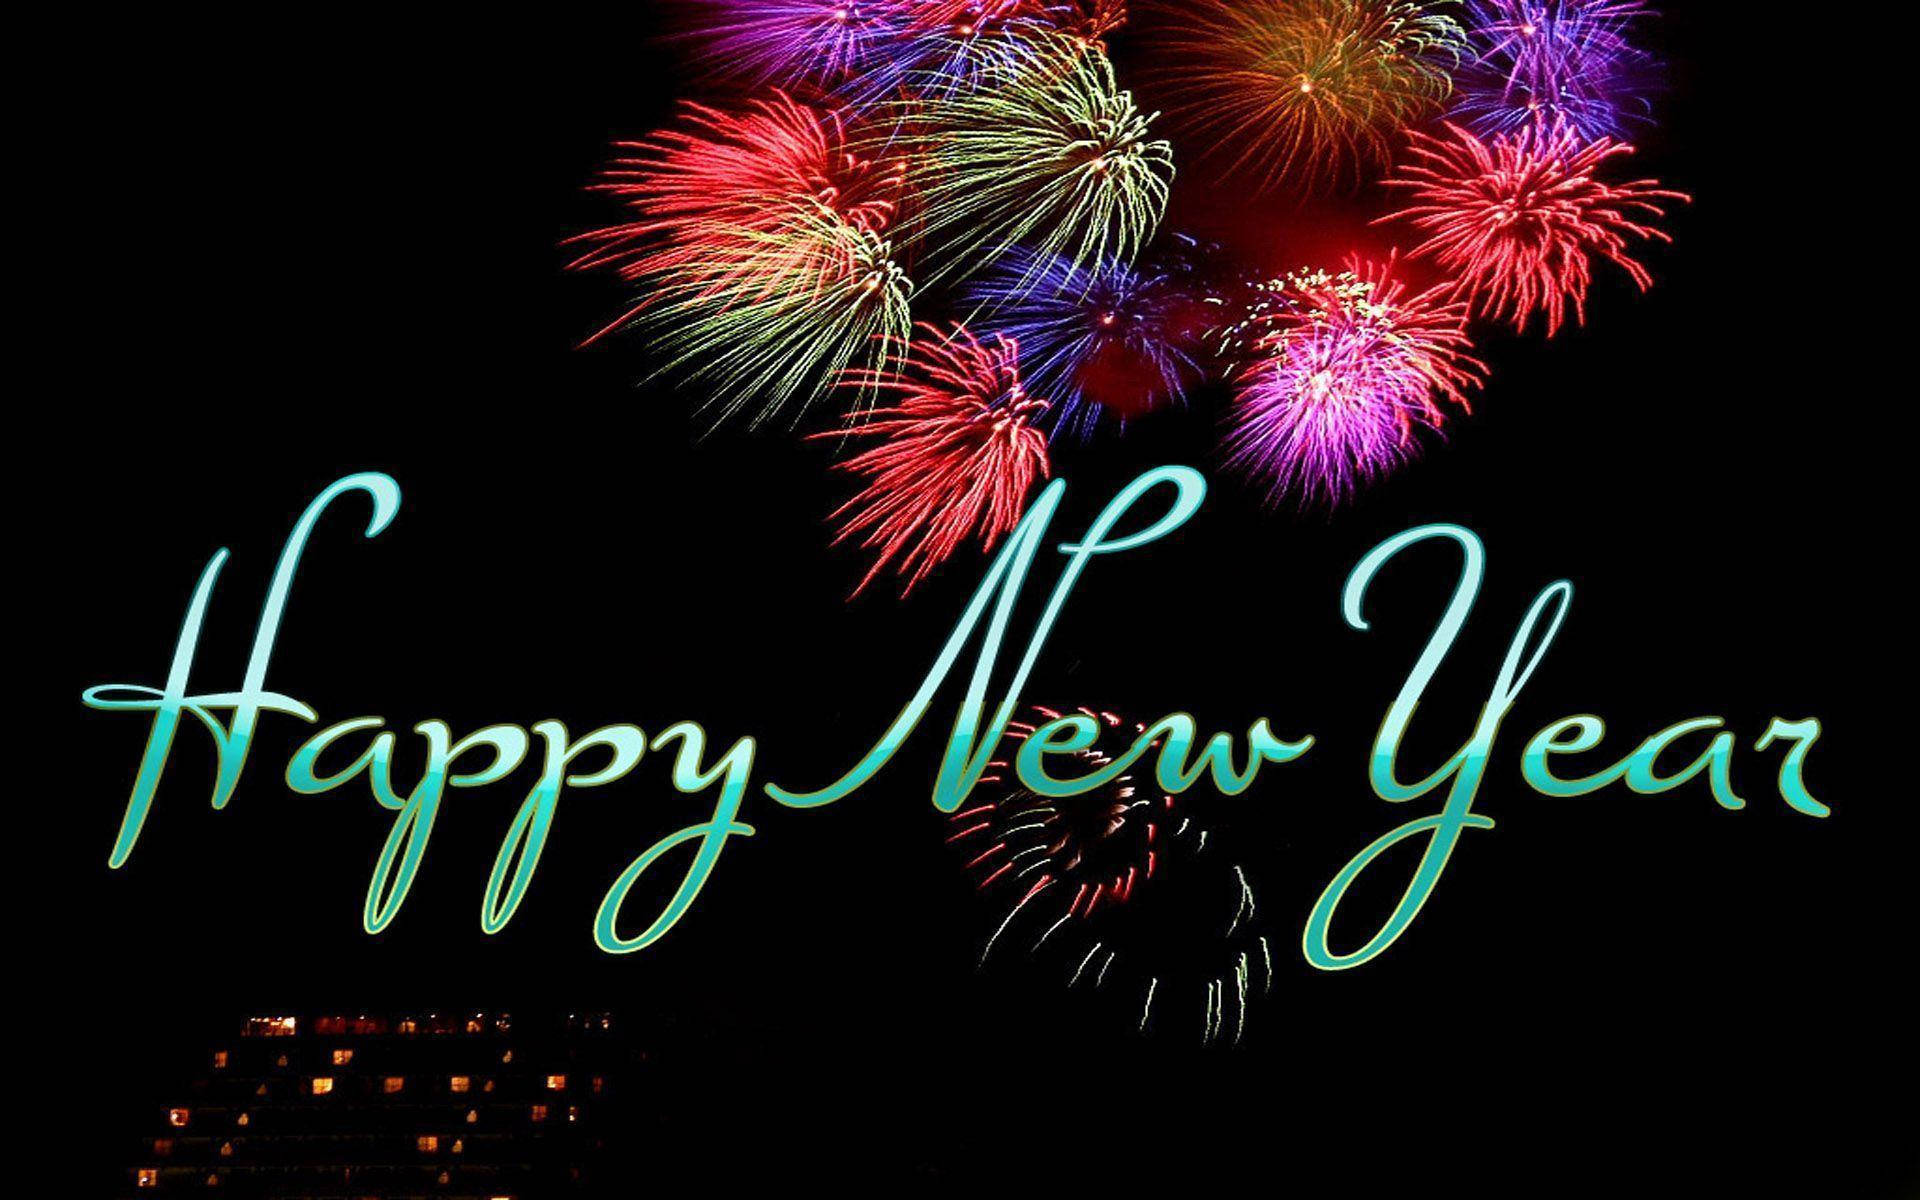 Blue Happy New Year 2021 Greeting Wallpaper